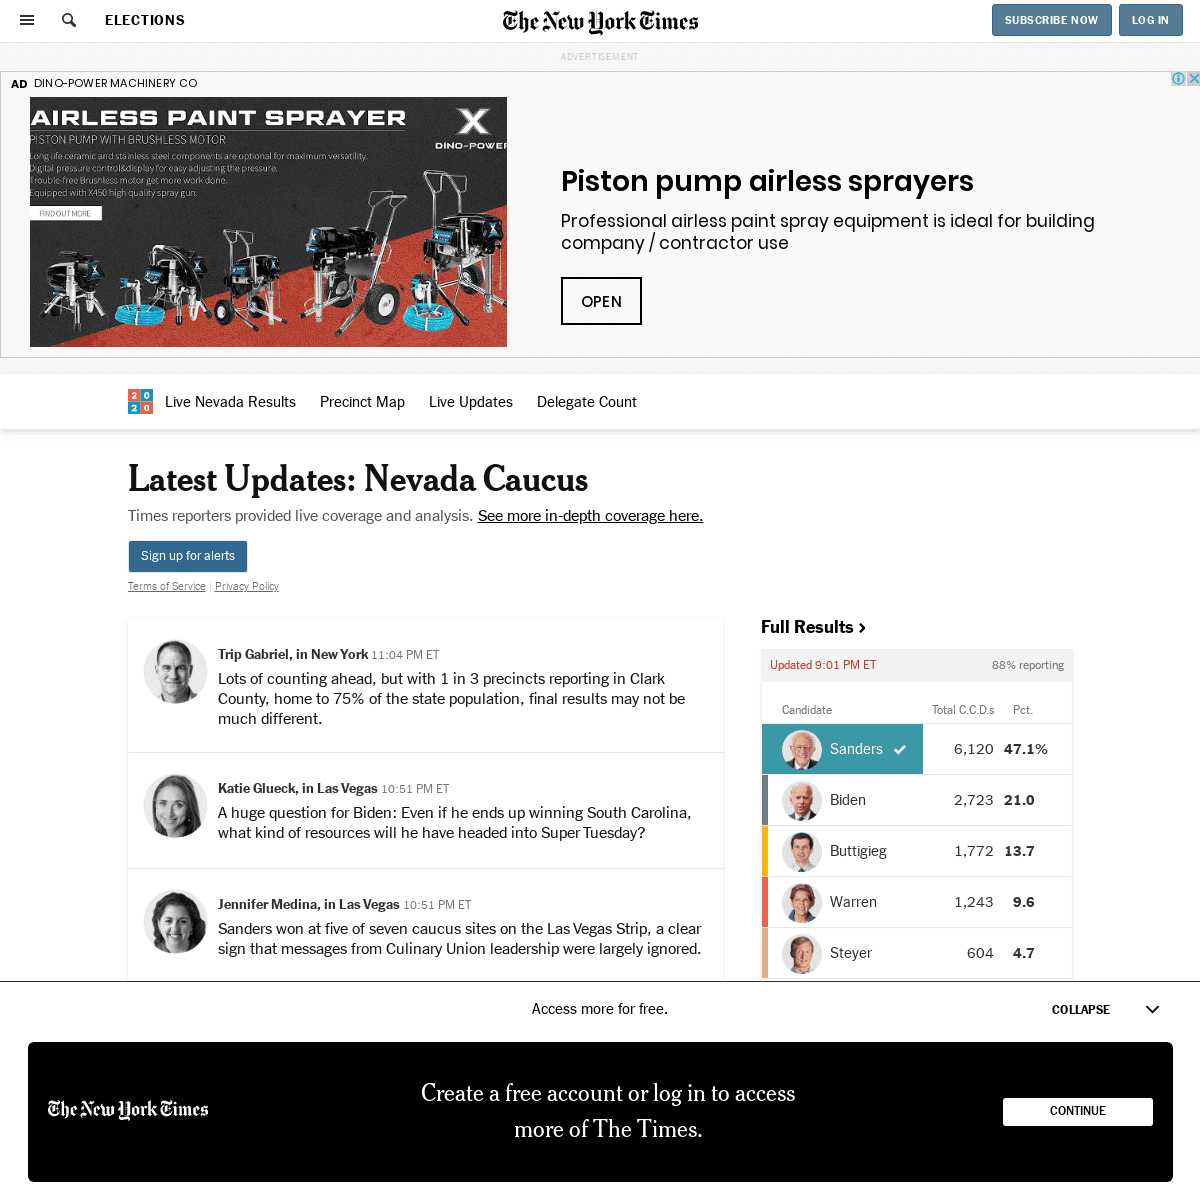 A complete backup of www.nytimes.com/interactive/2020/02/22/us/elections/results-nevada-caucus-live-updates.html